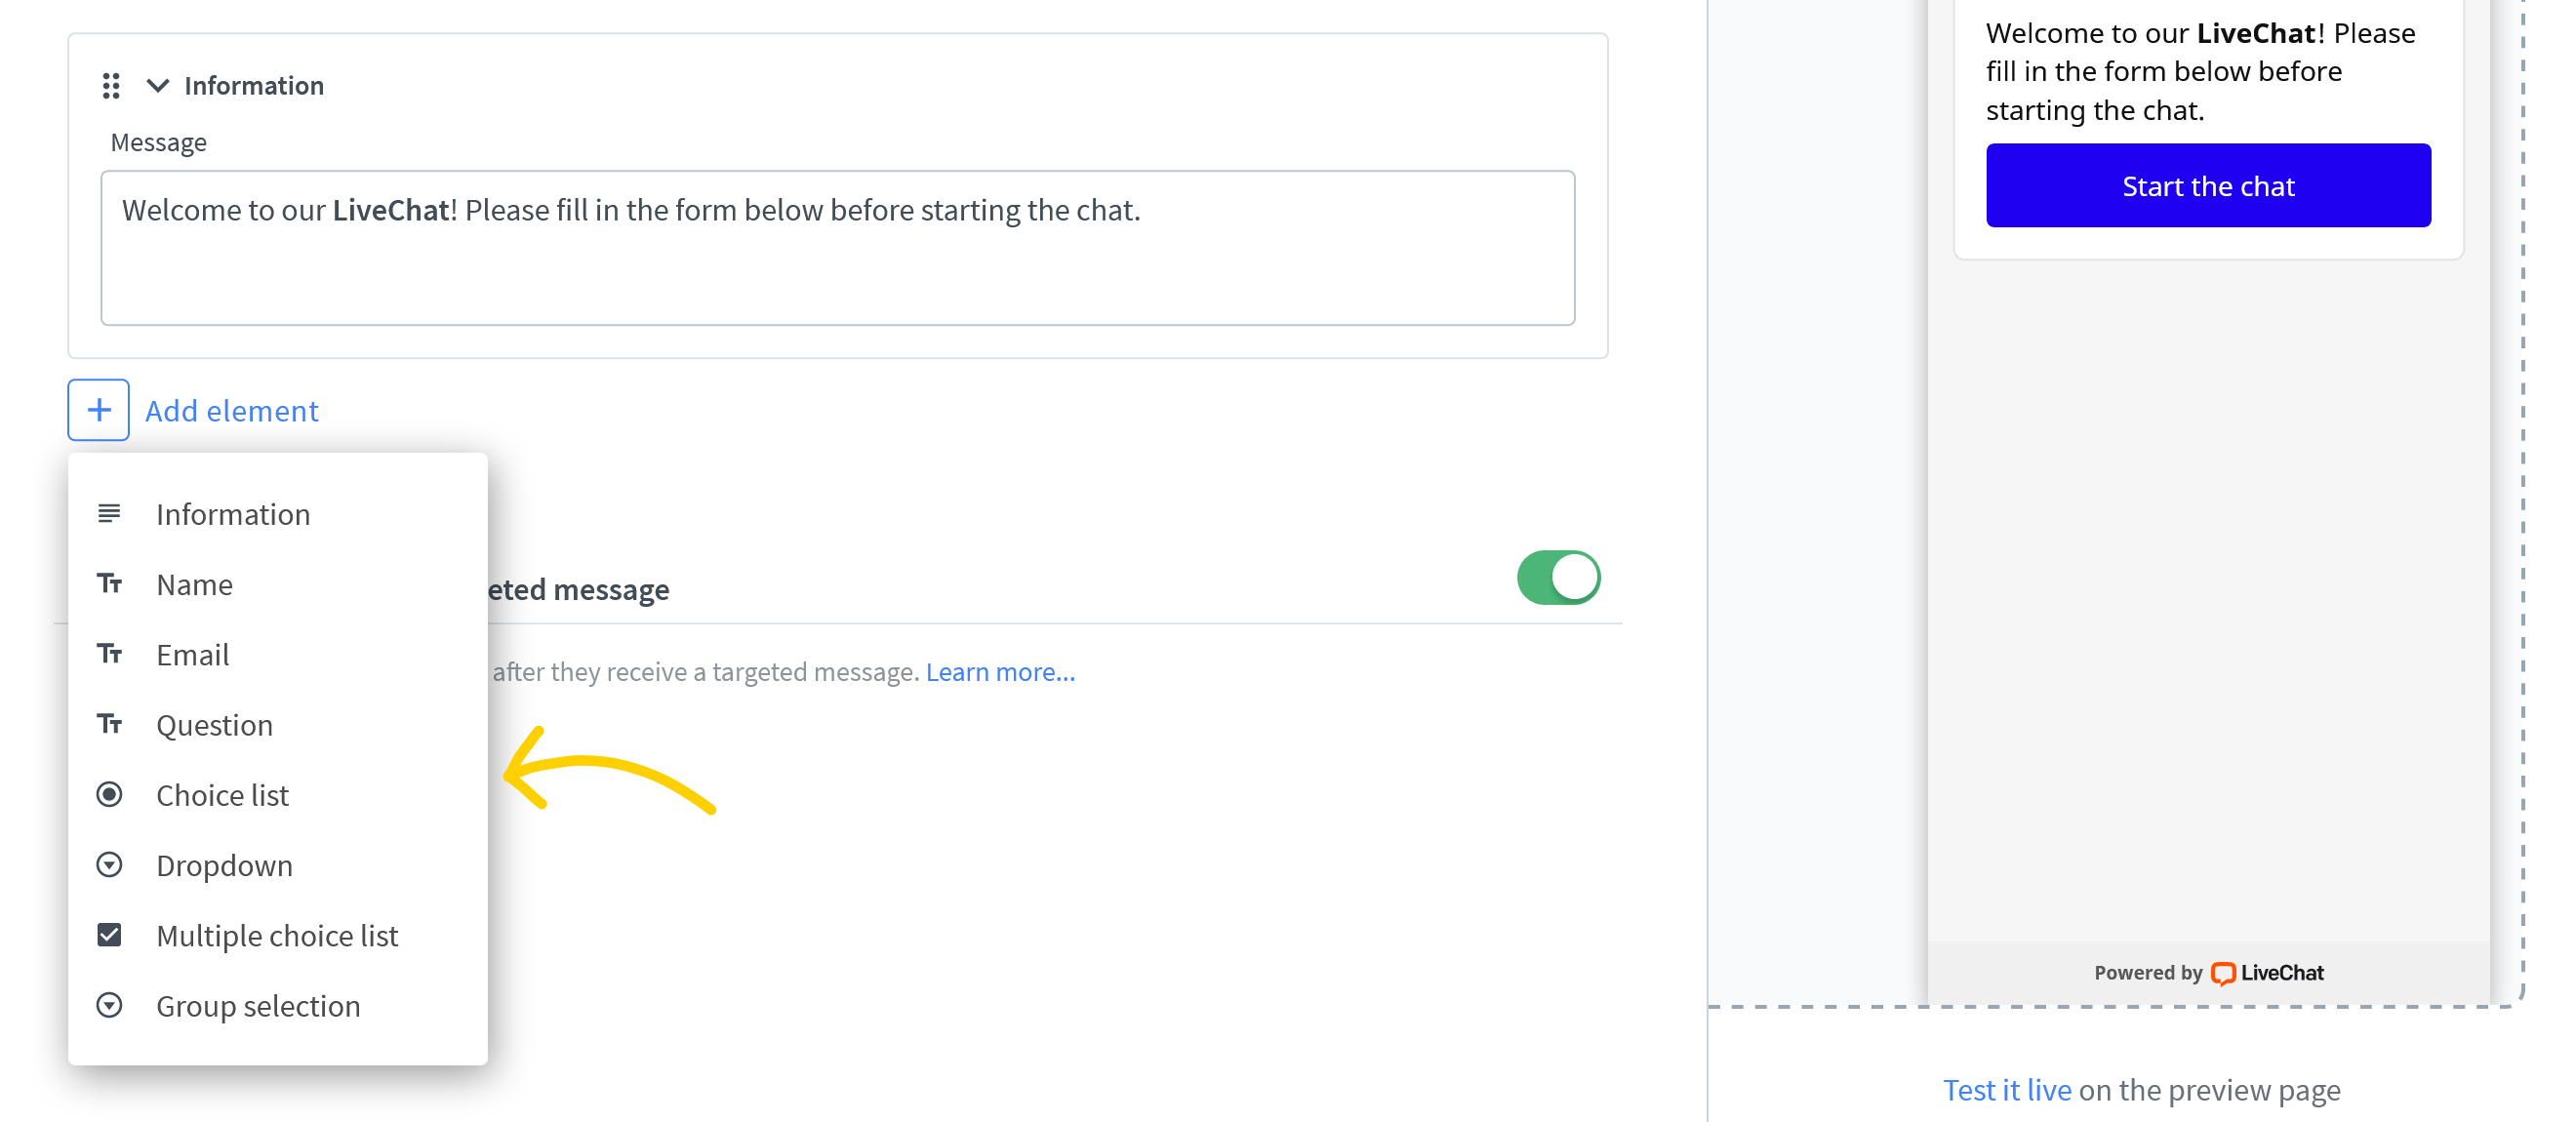 Choose a field you want to add to pre-chat form